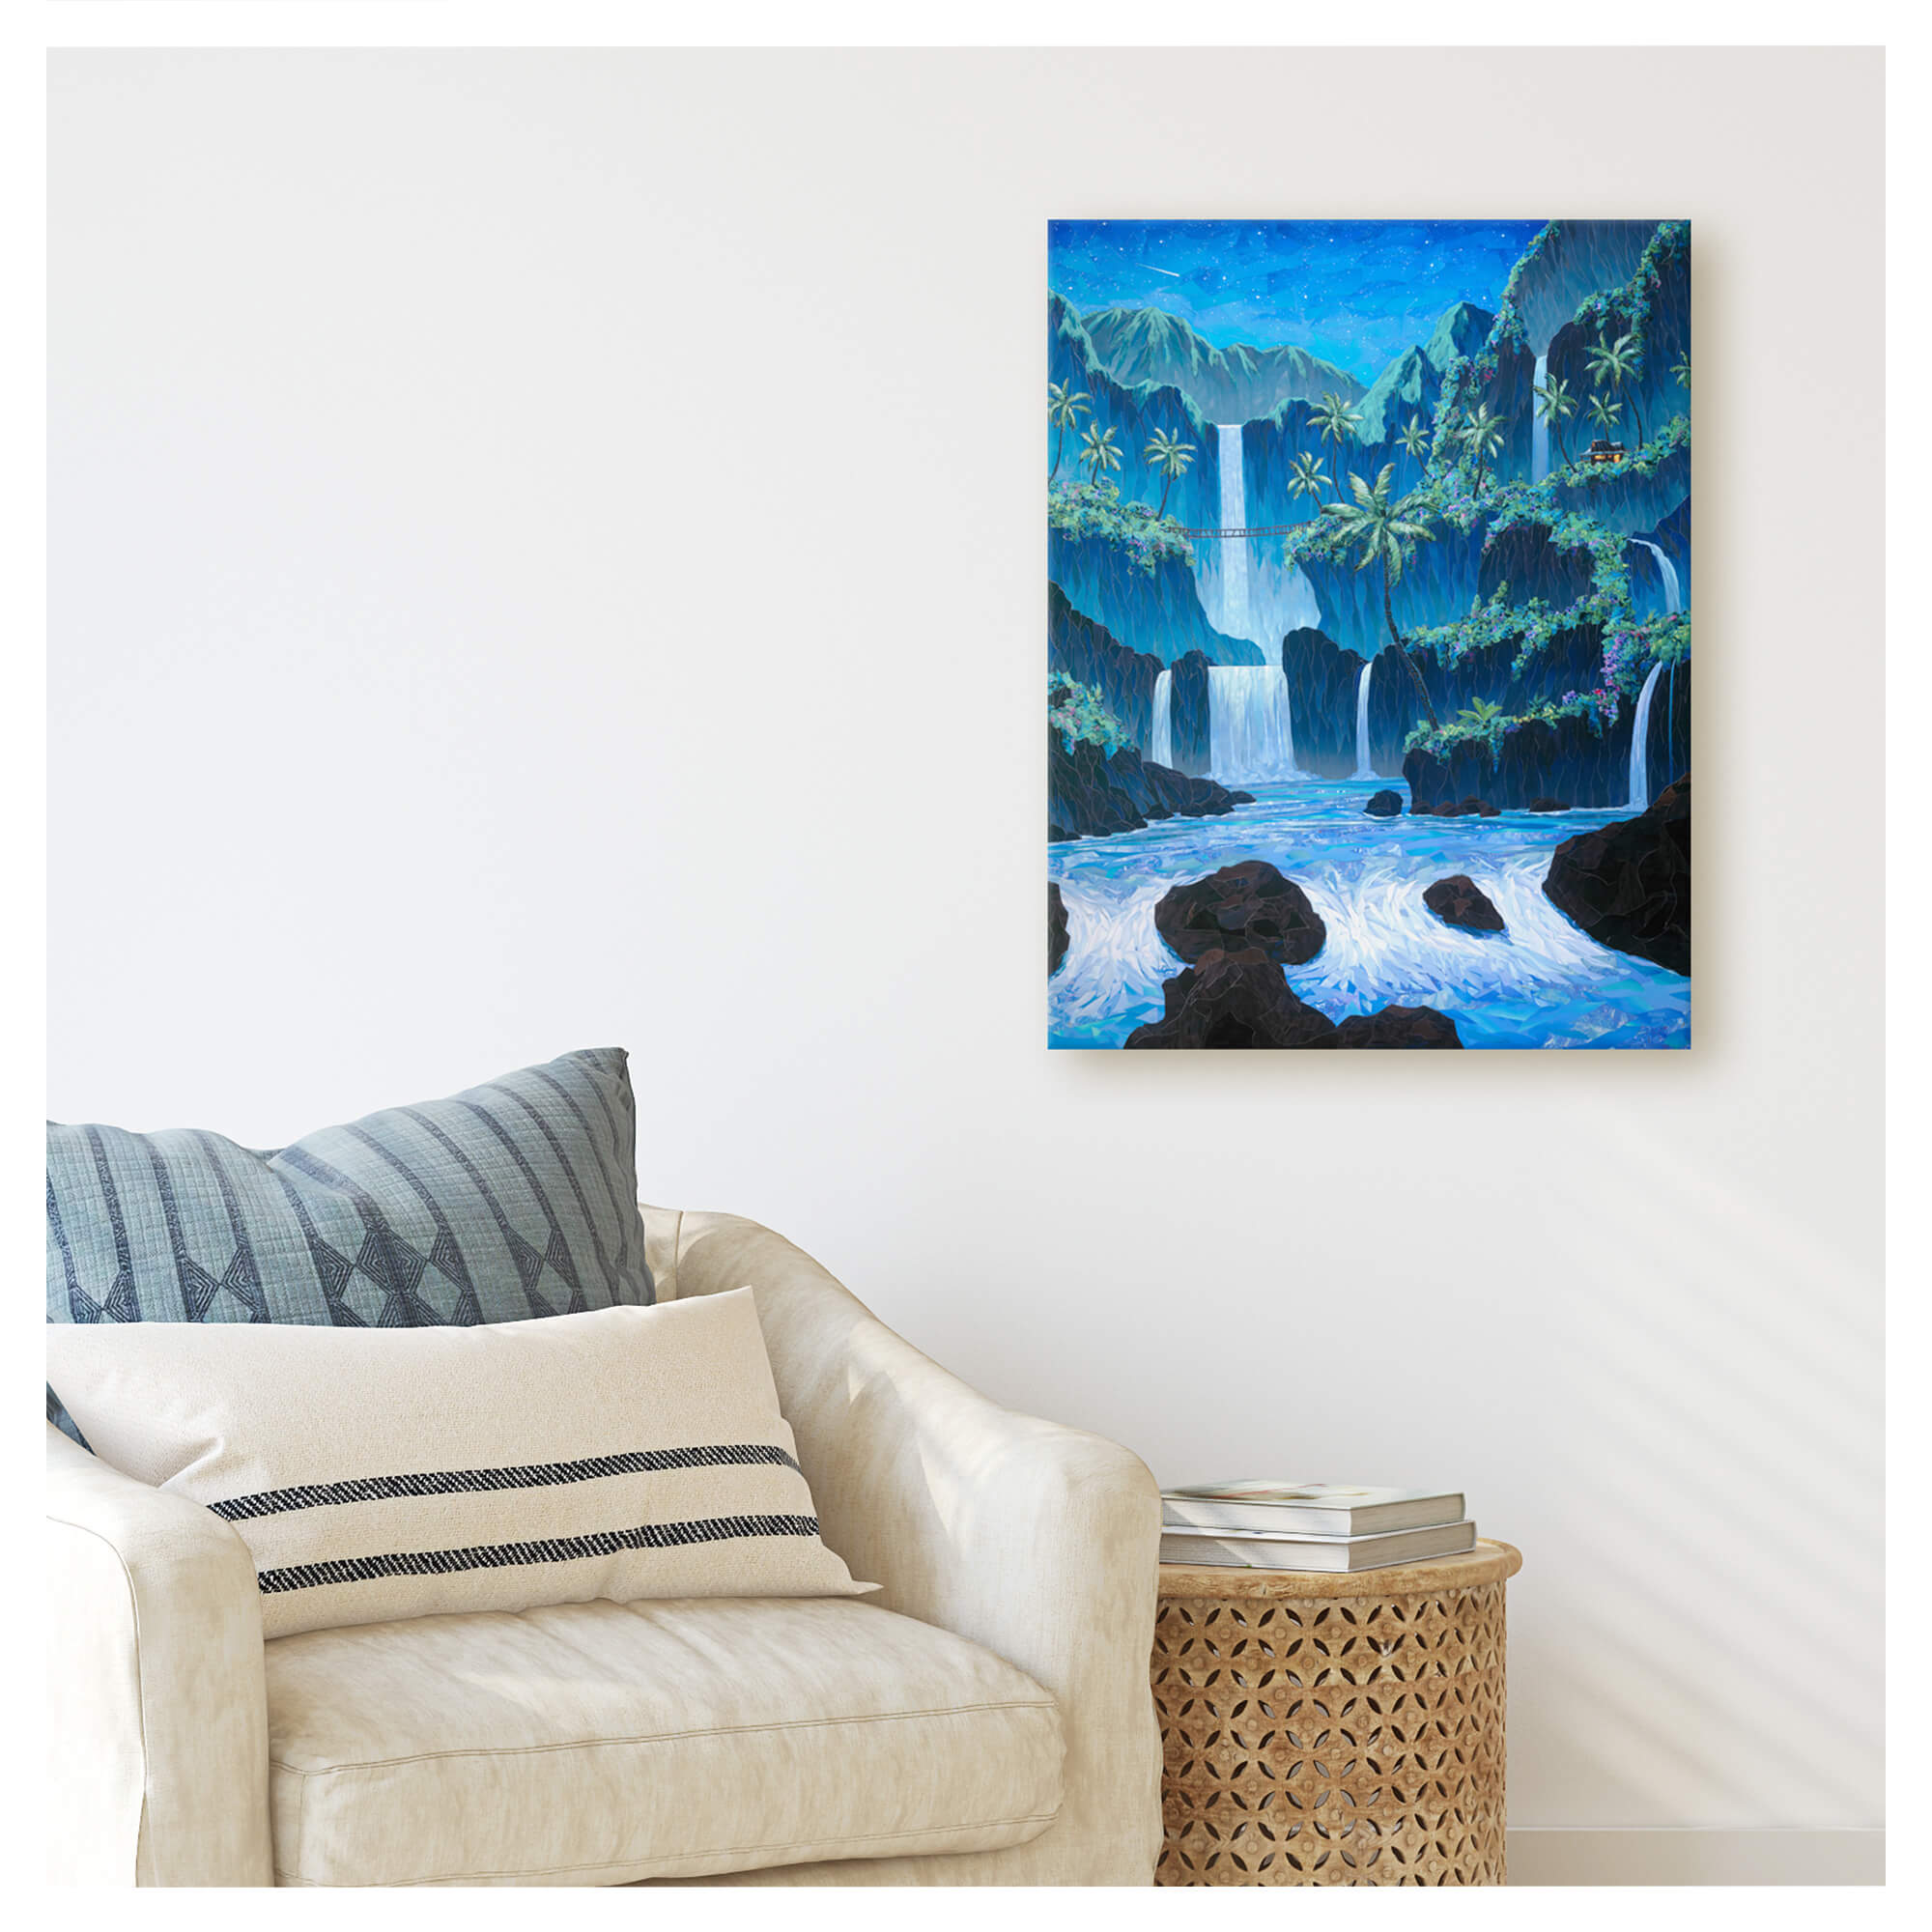 A canvas giclée art print featuring a collage of a dreamy tropical paradise with several waterfalls, surrounded by Mountains and colorful tropical flowers by Hawaii artist Patrick Parker